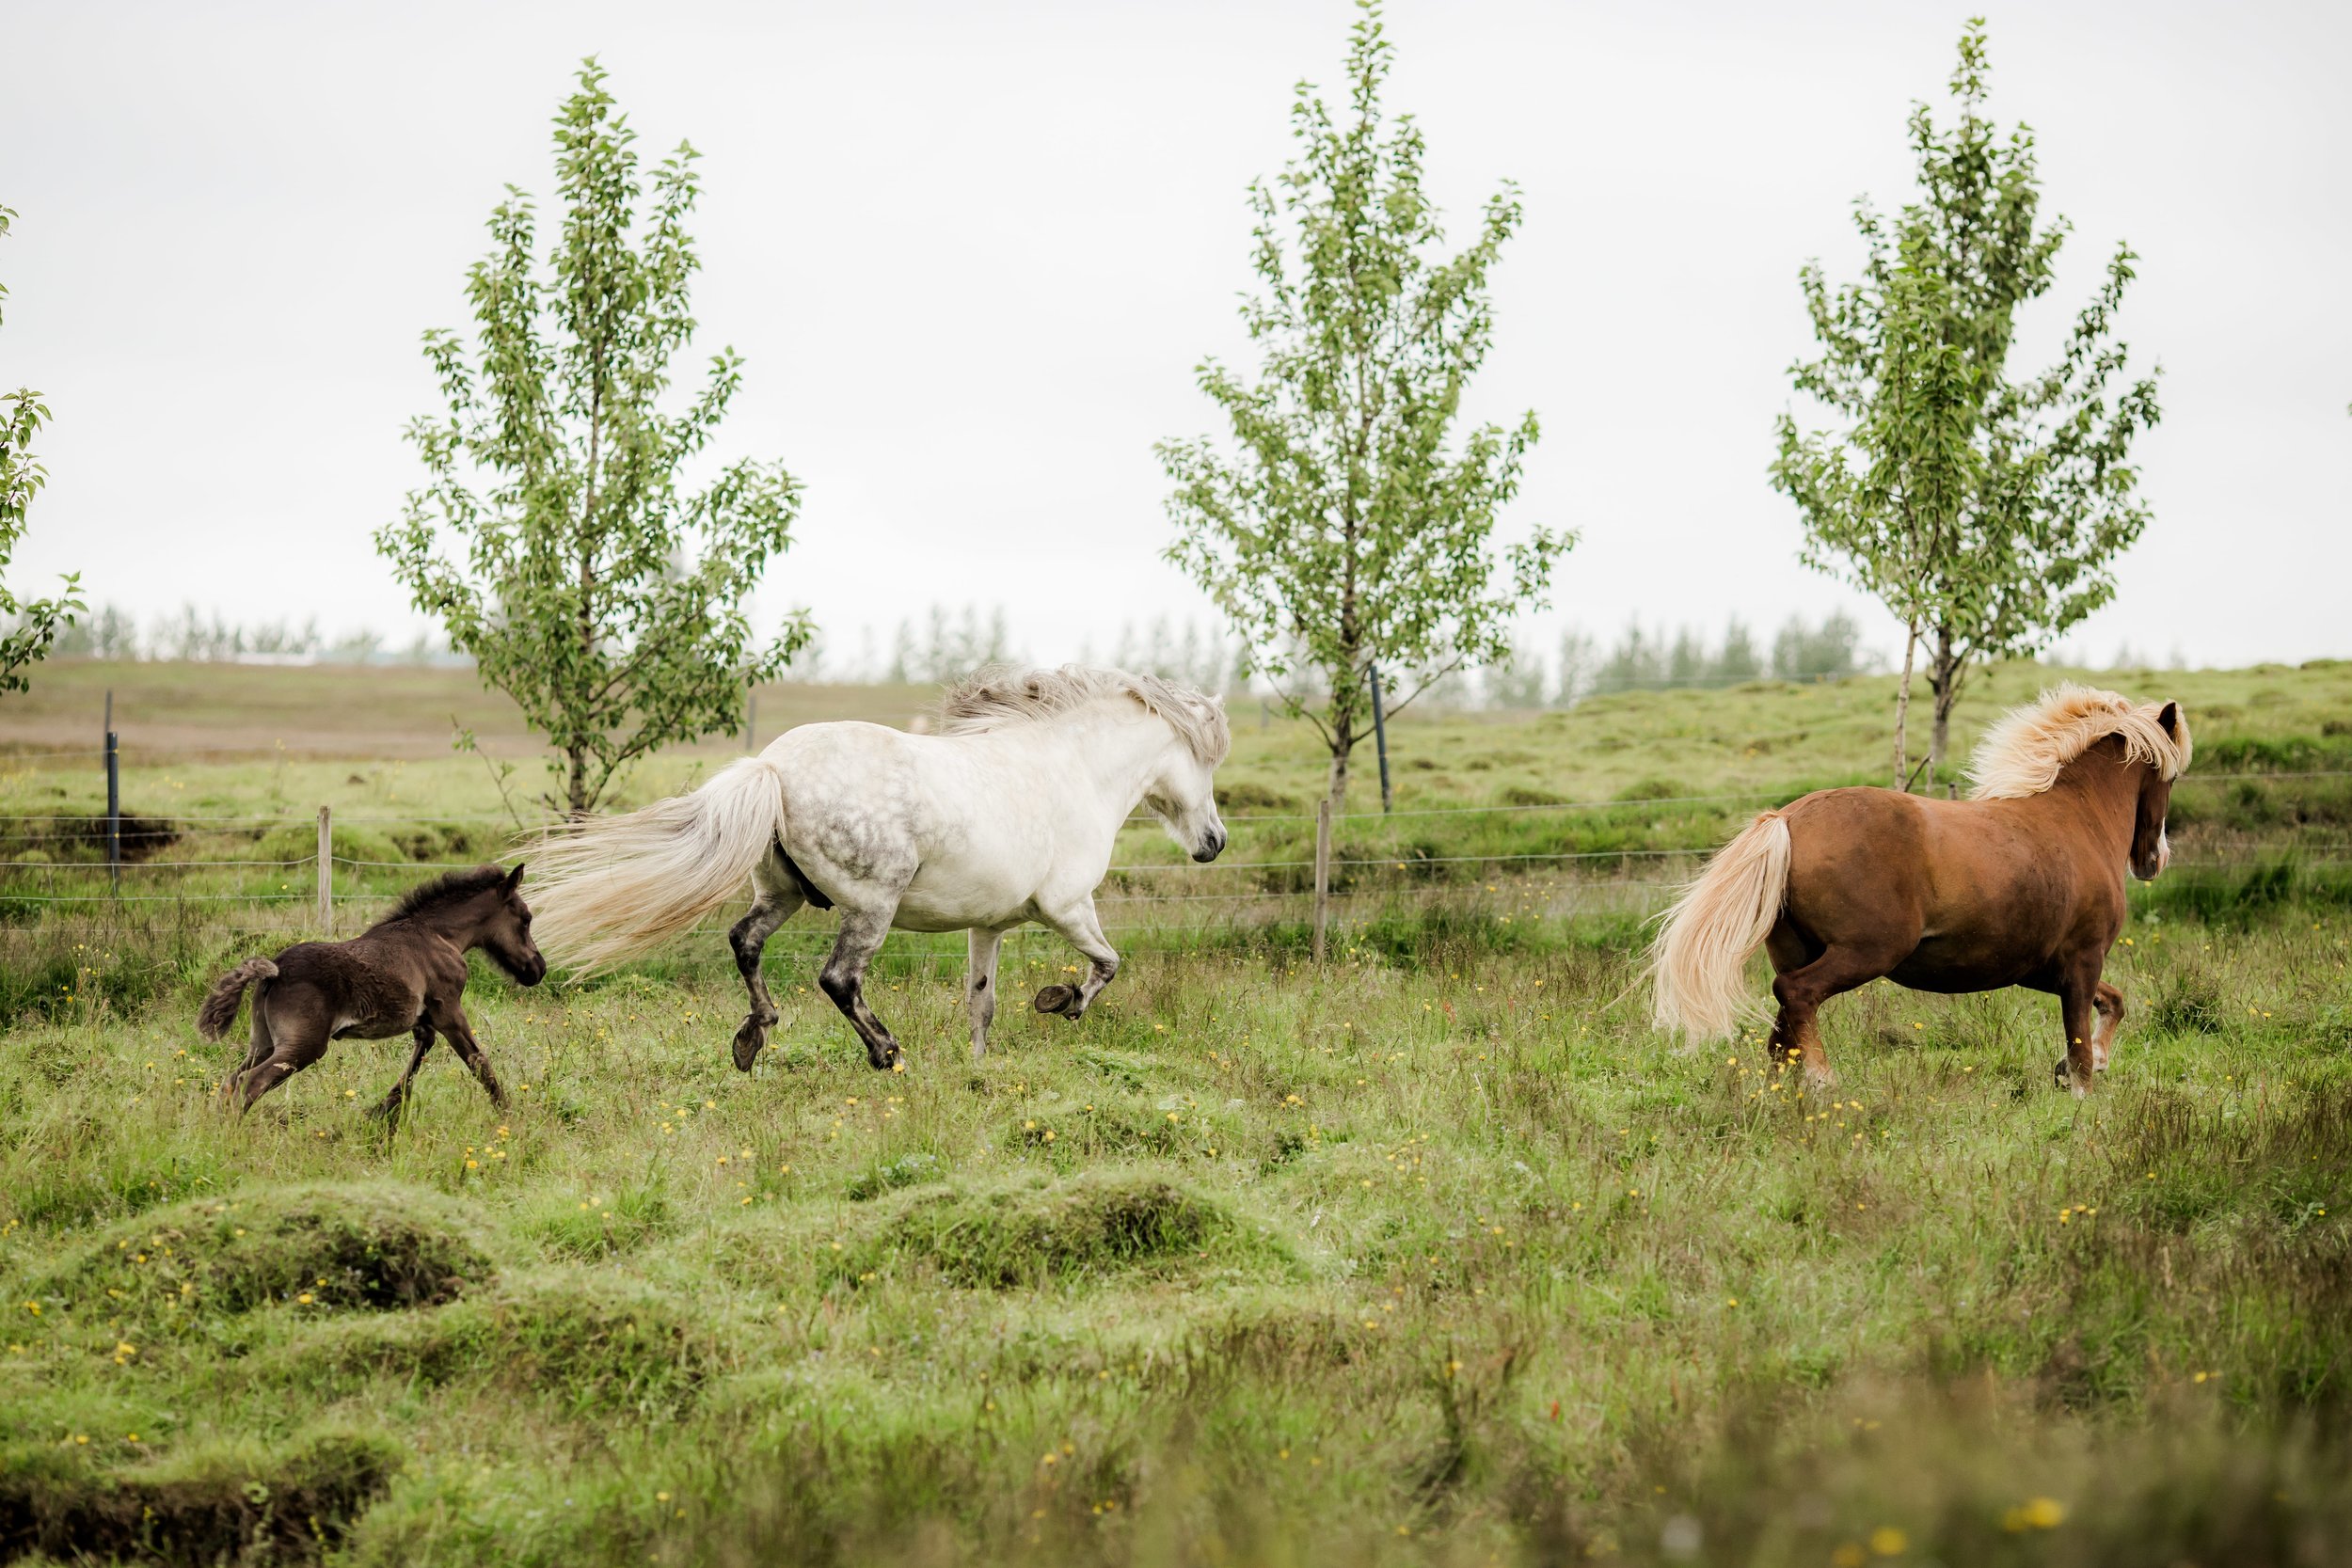 Horses in Iceland by Christina Swanson now on Cottage Hill35.jpg